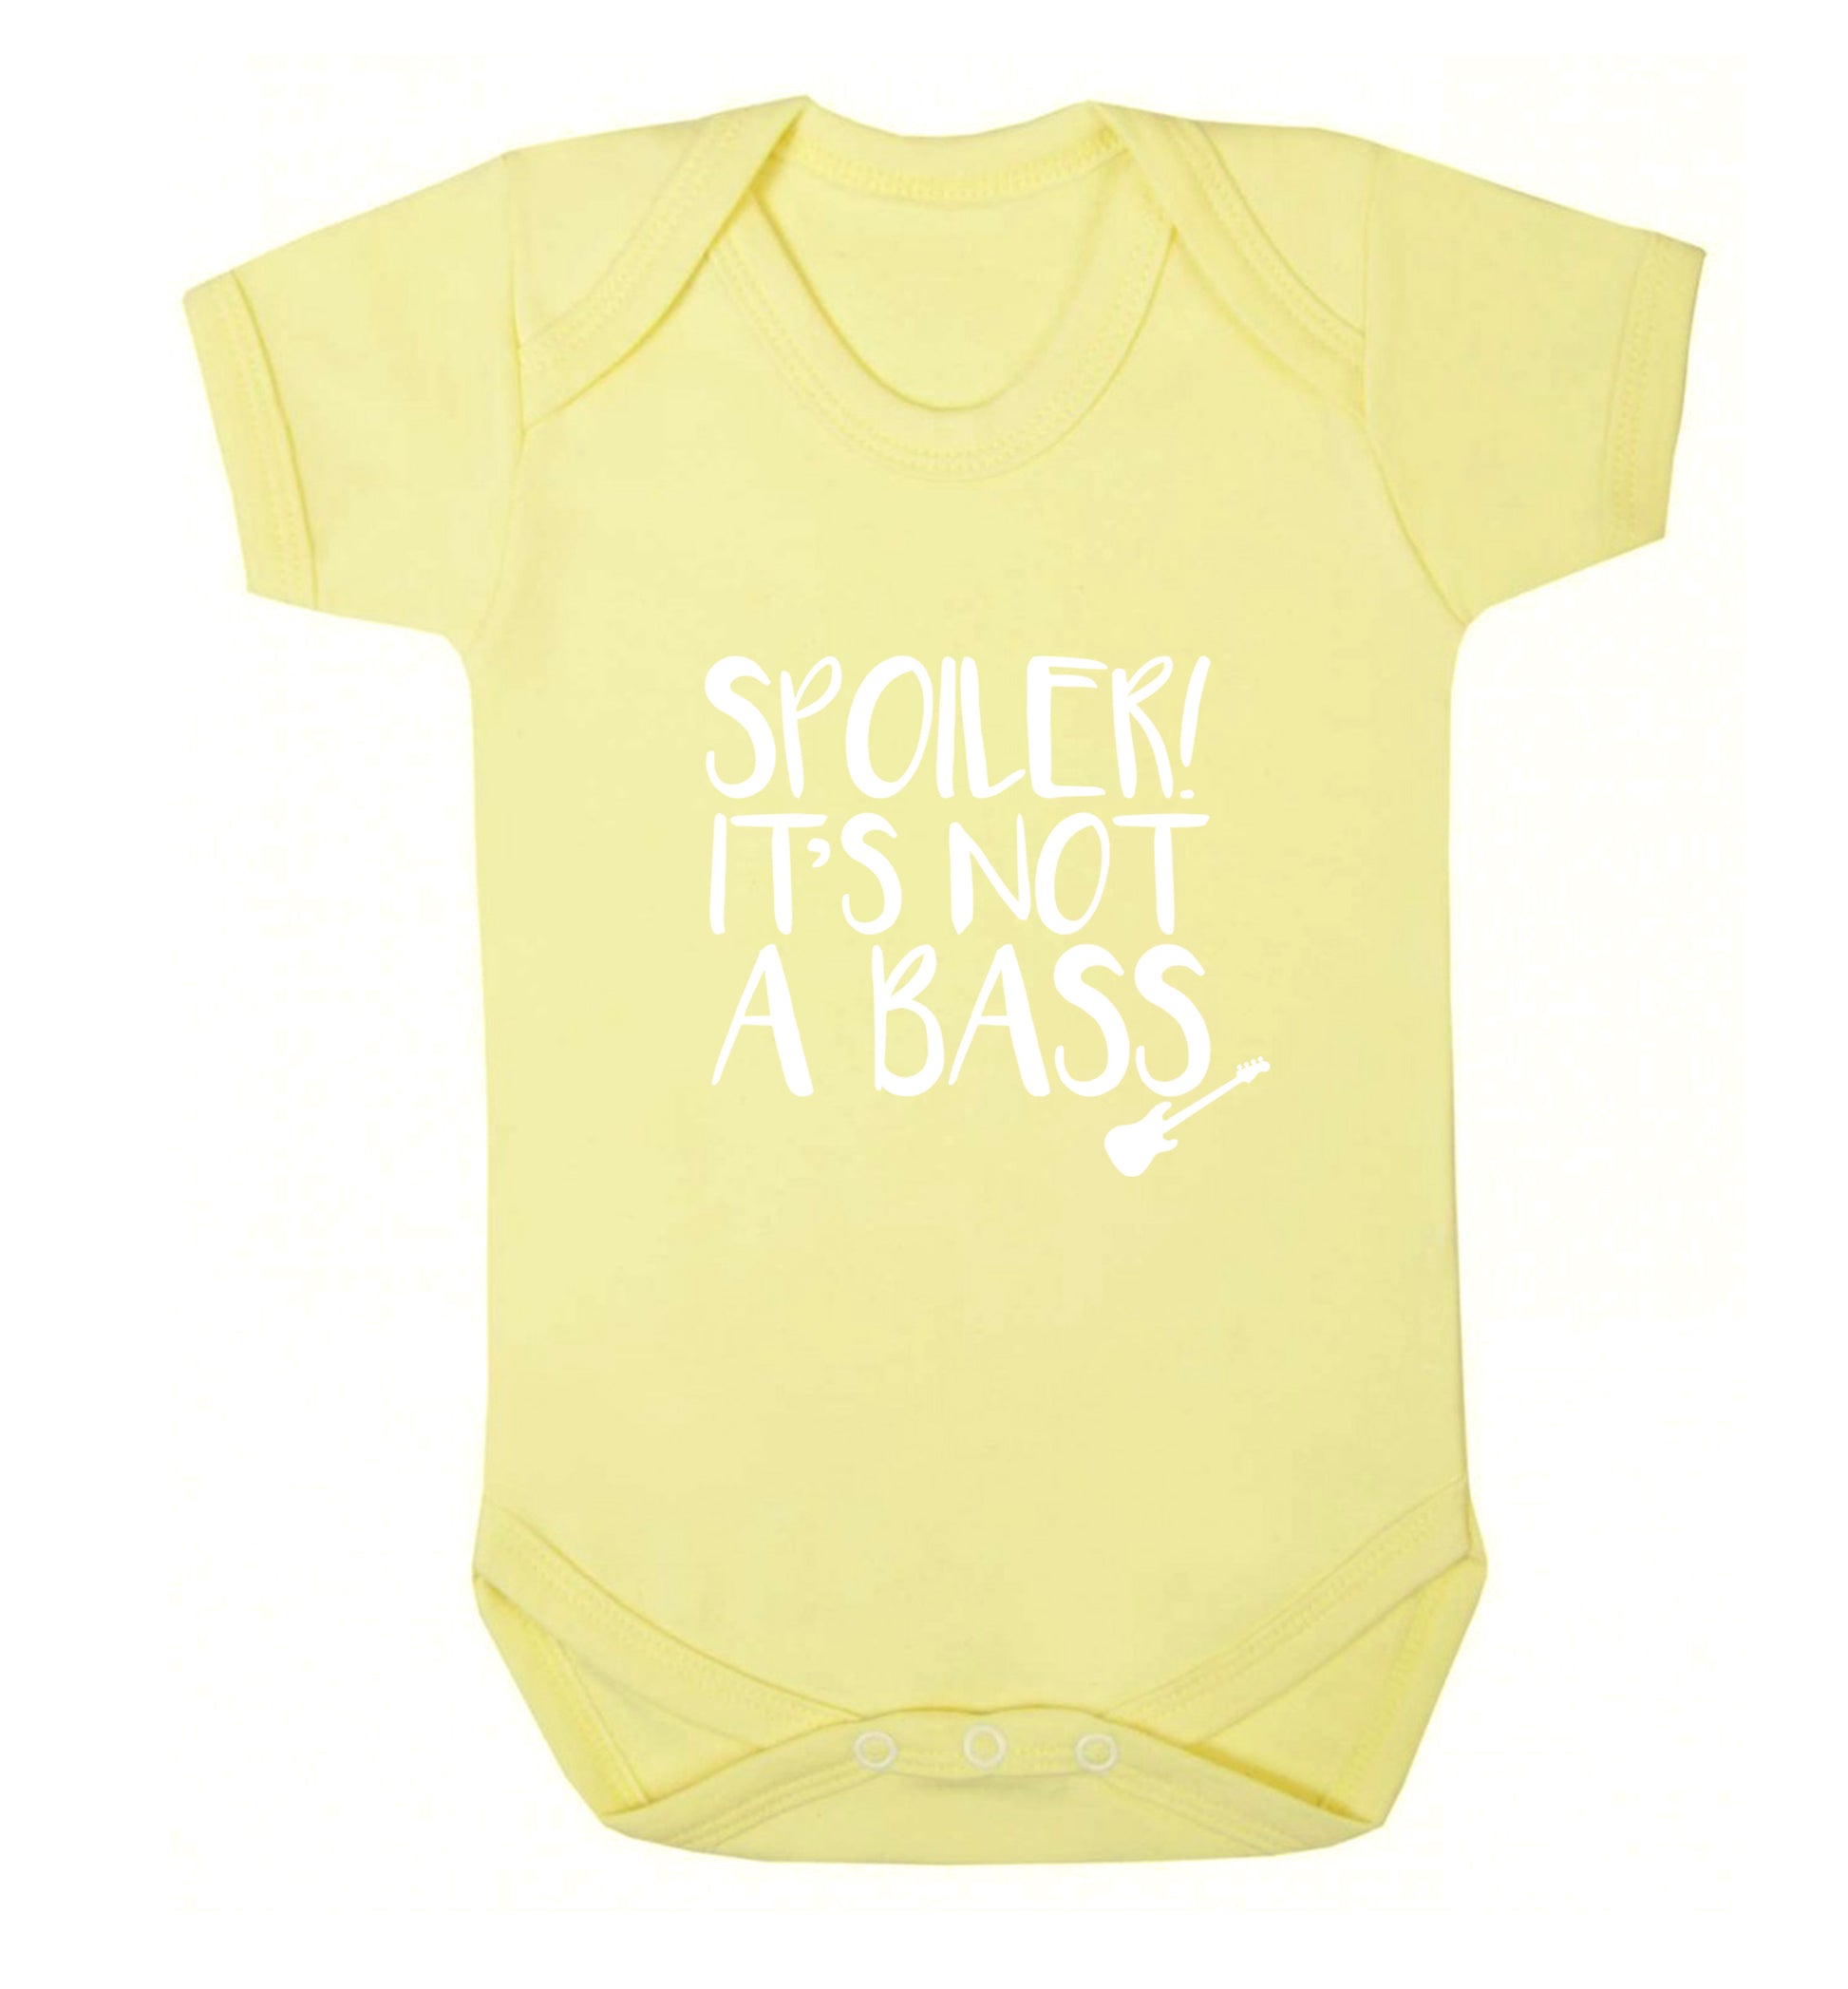 Spoiler it's not a bass Baby Vest pale yellow 18-24 months